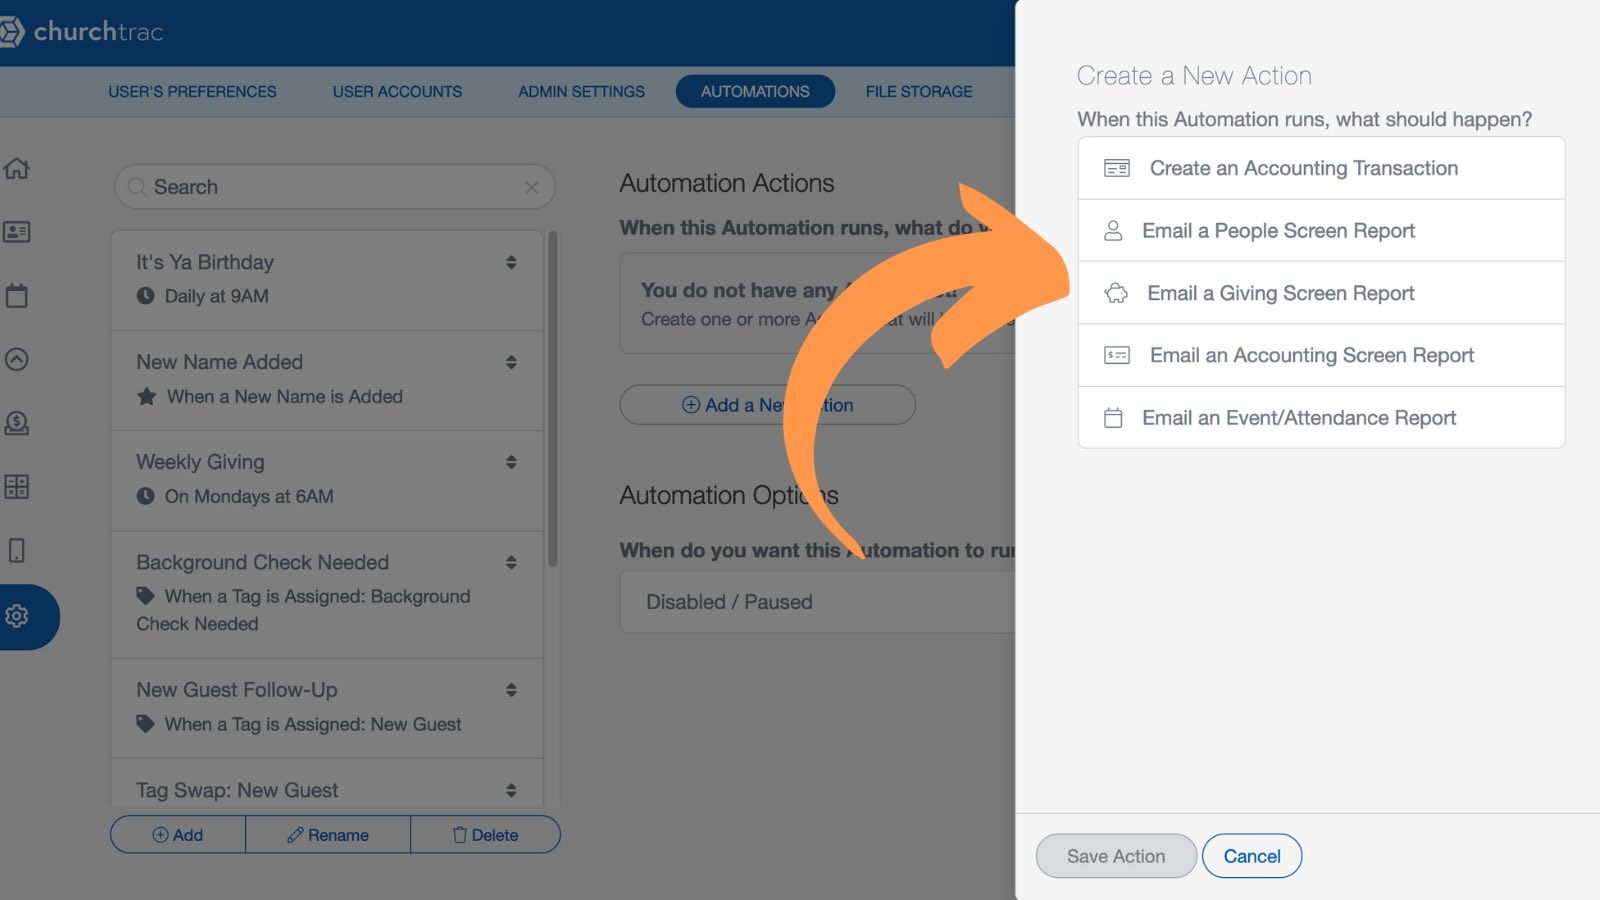 How to create actions for your Application automation in the Church Automation Software